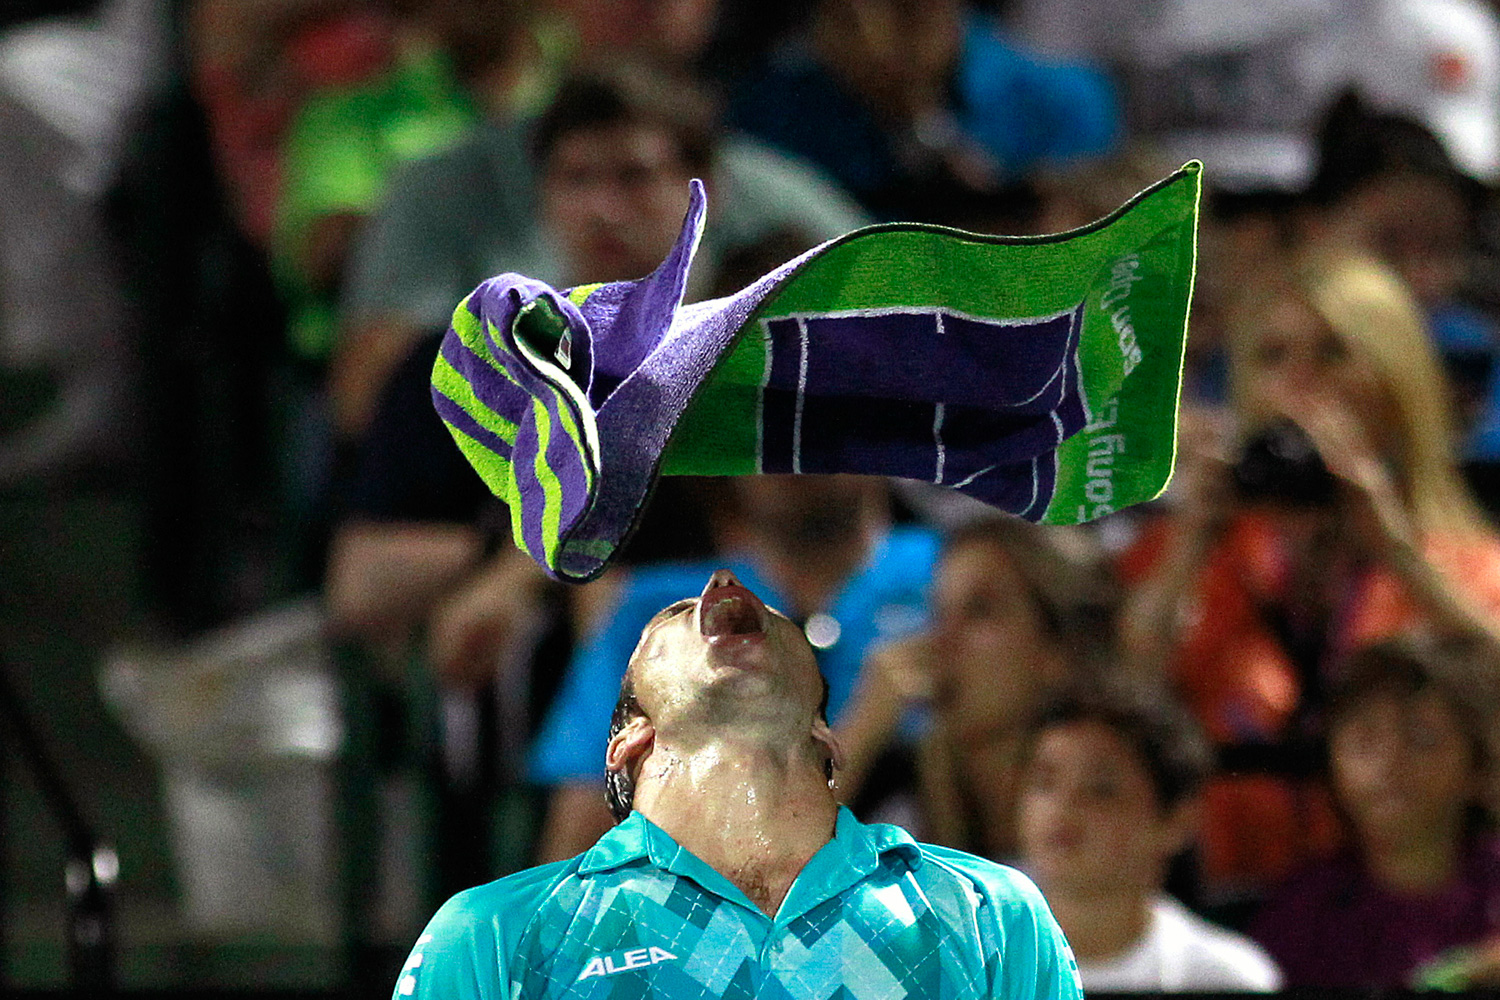 March 25, 2012. Stepanek of the Czech Republic throws his towel over his head  after losing a challenge to Nadal of Spain during their men's singles match at the Sony Ericsson Open tennis tournament in Key Biscayne, Fla.